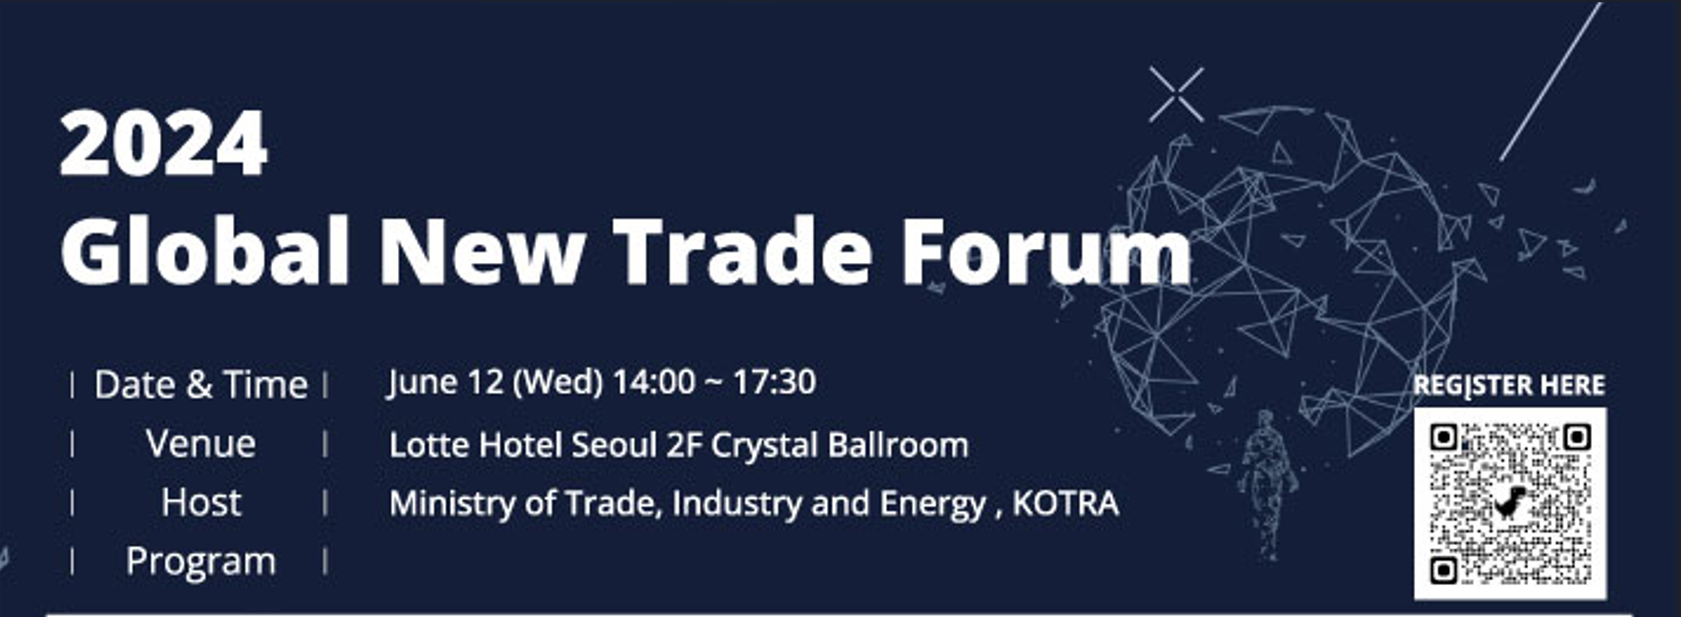 2024 Global New Trade Forum